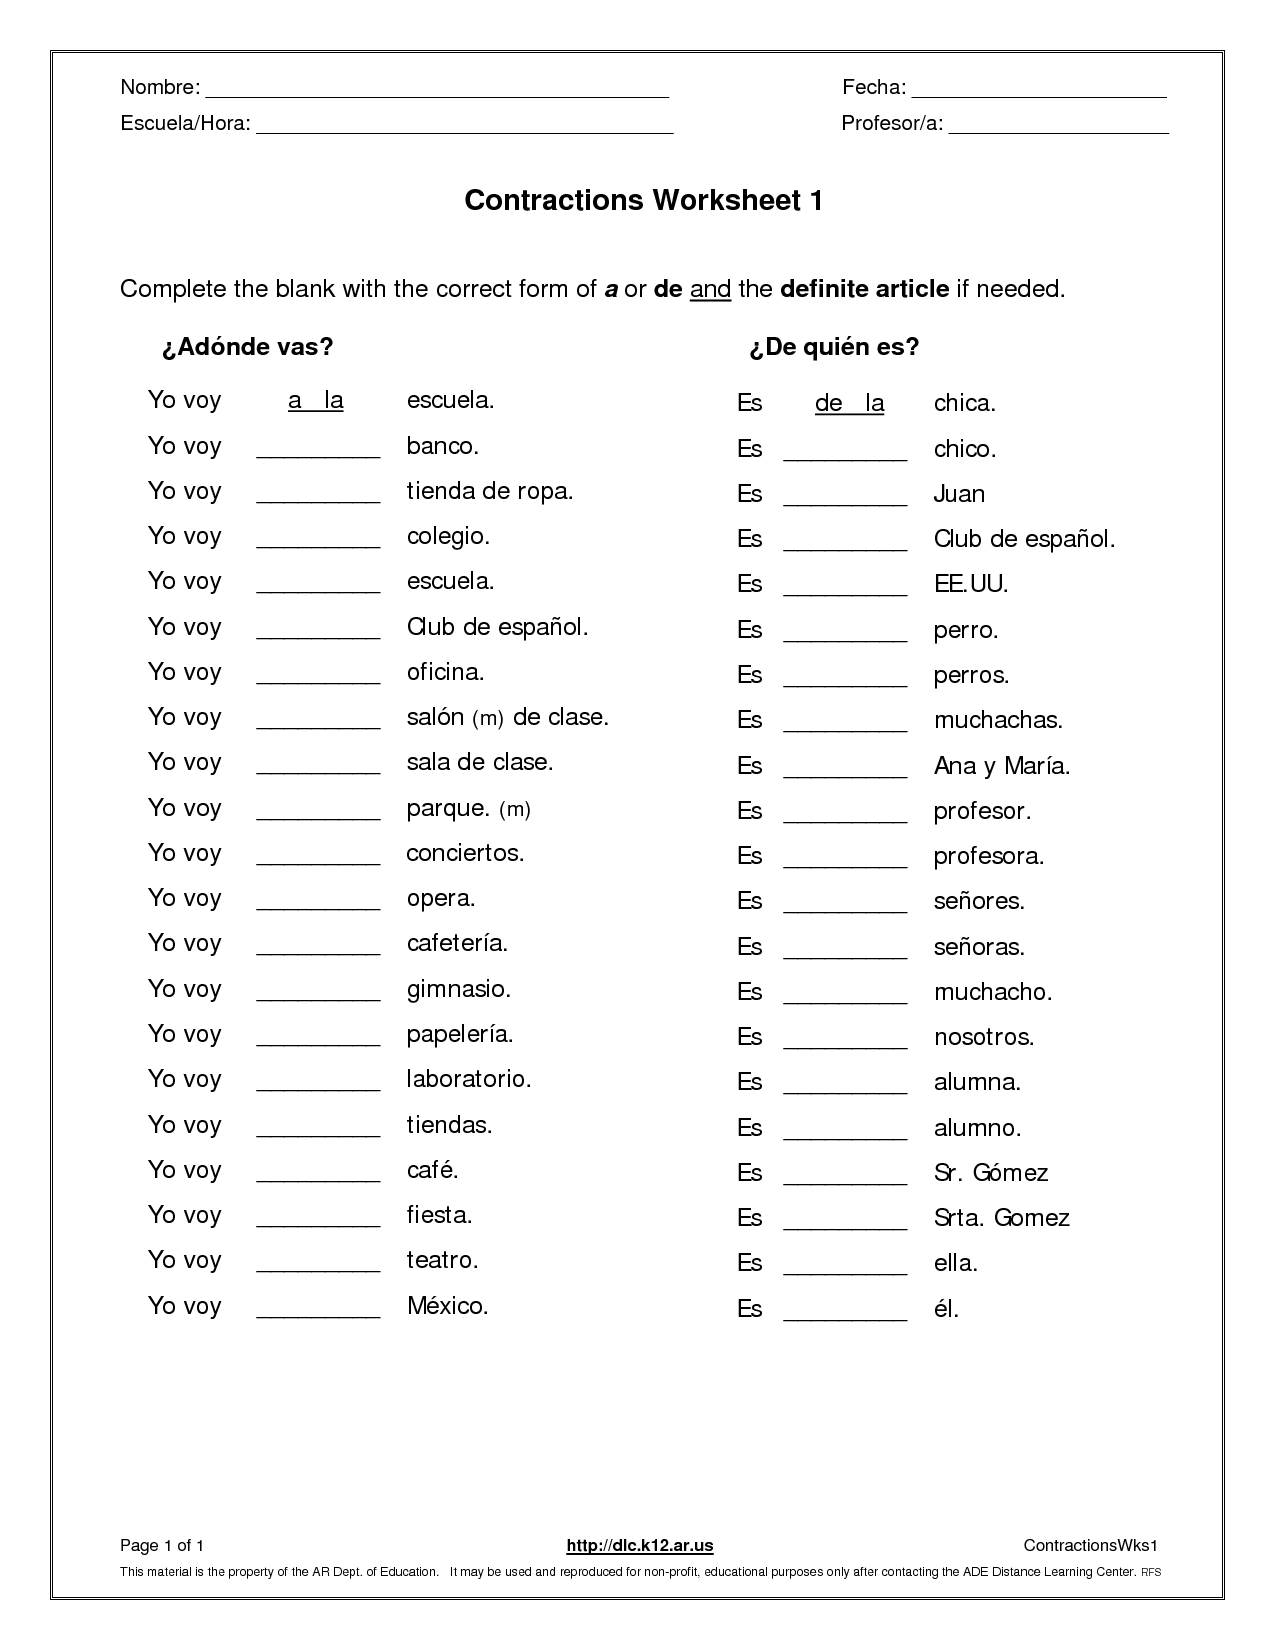 6-best-images-of-free-printable-contraction-worksheets-free-printable-contraction-worksheets